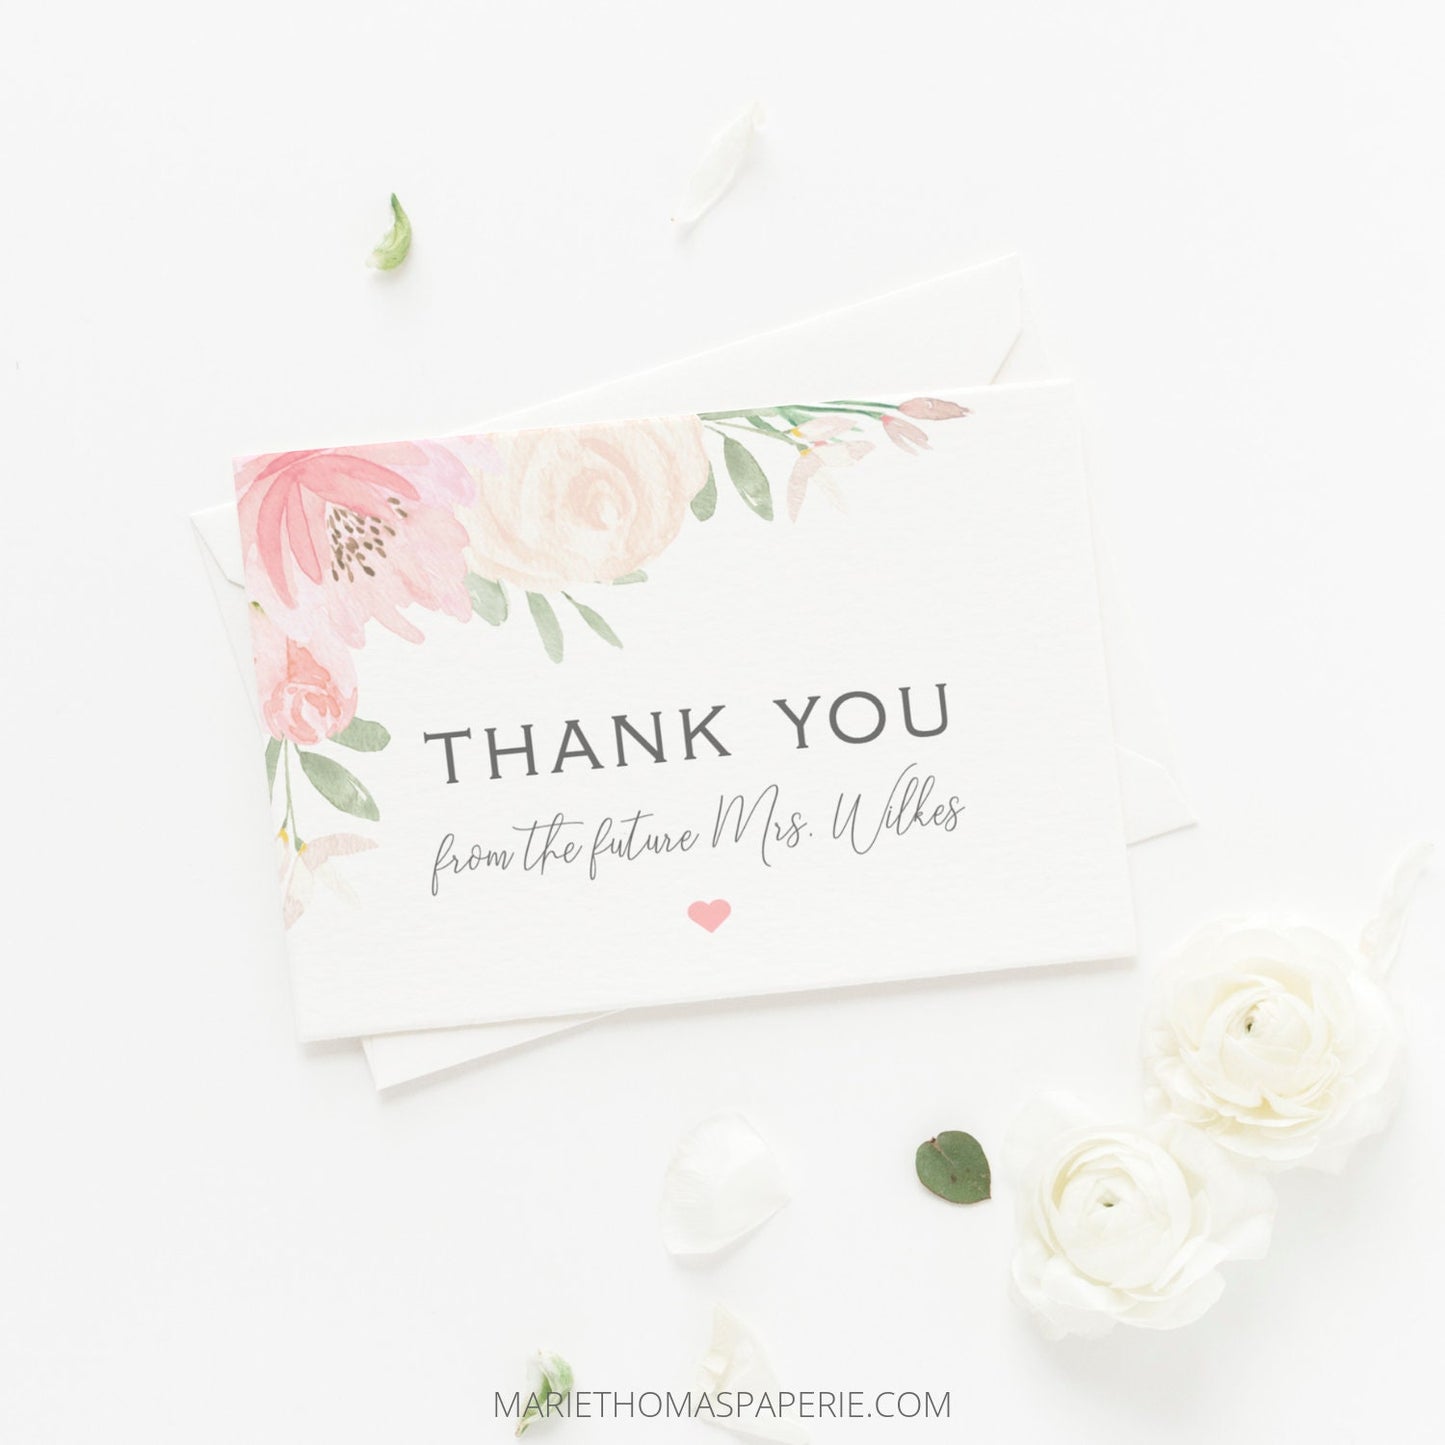 Editable Wedding Thank You Cards Cards Personalized Bridal Shower Thank You Cards Blush Floral Template